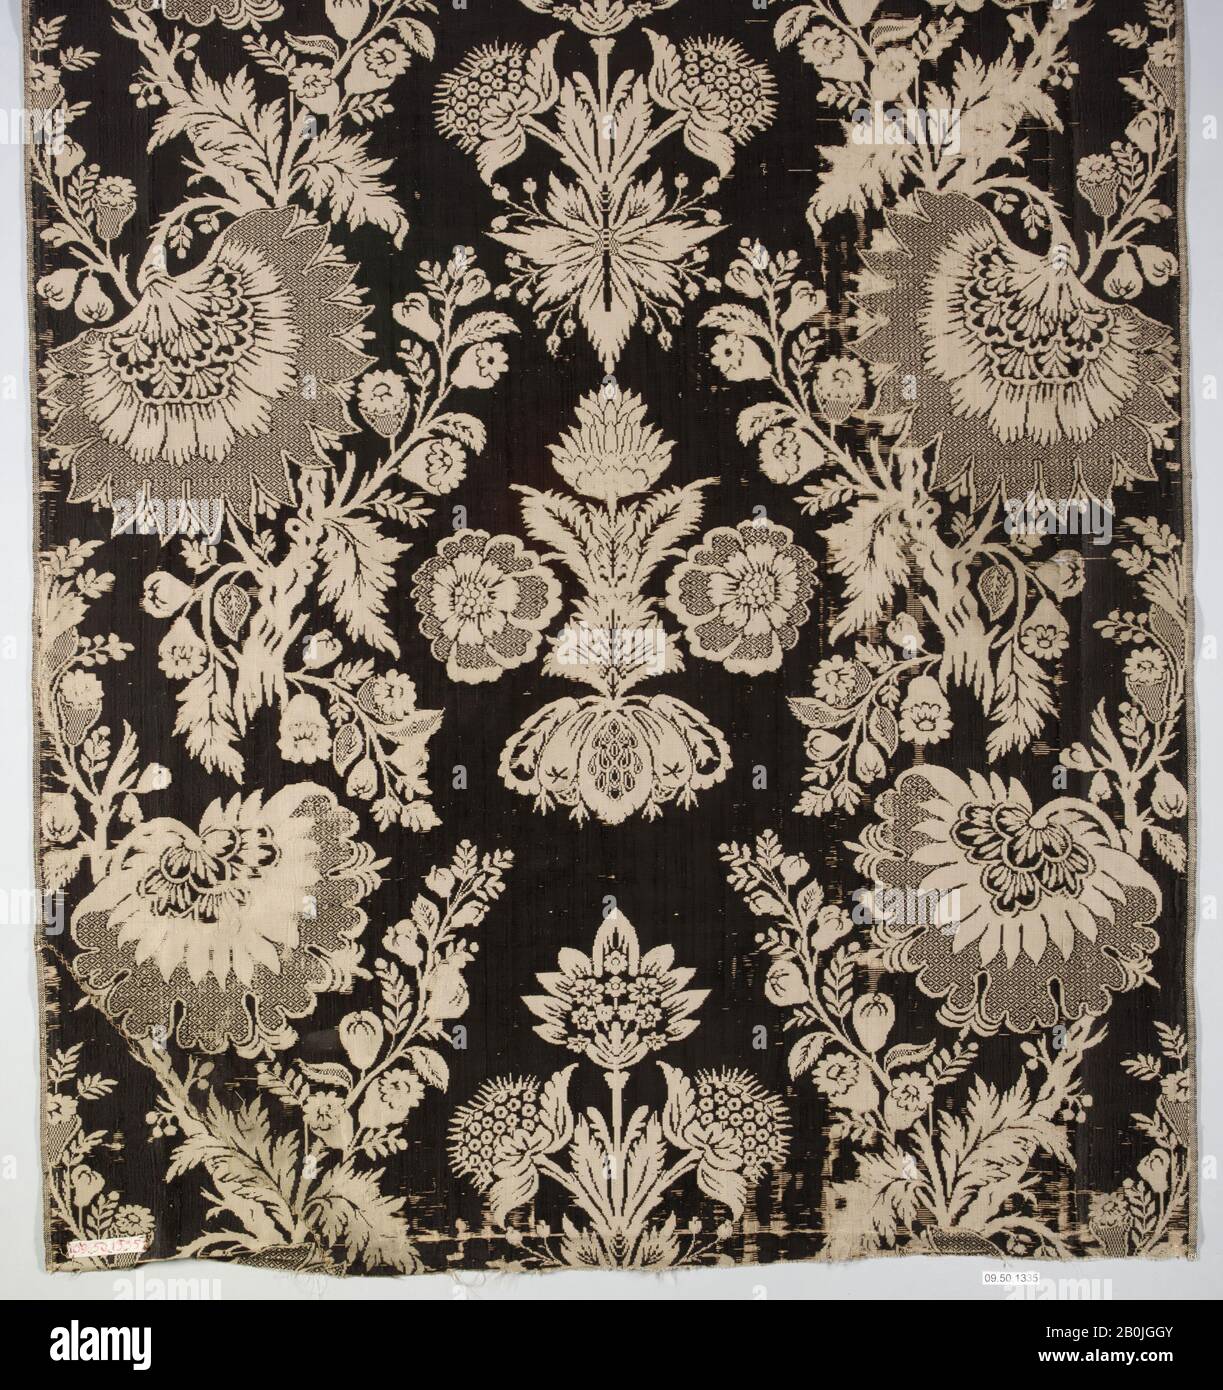 Piece, French, ca. 1725–30, French, Silk, Overall: 26 1/4 x 21 in. (66.7 x 53.3 cm), Textiles-Woven Stock Photo